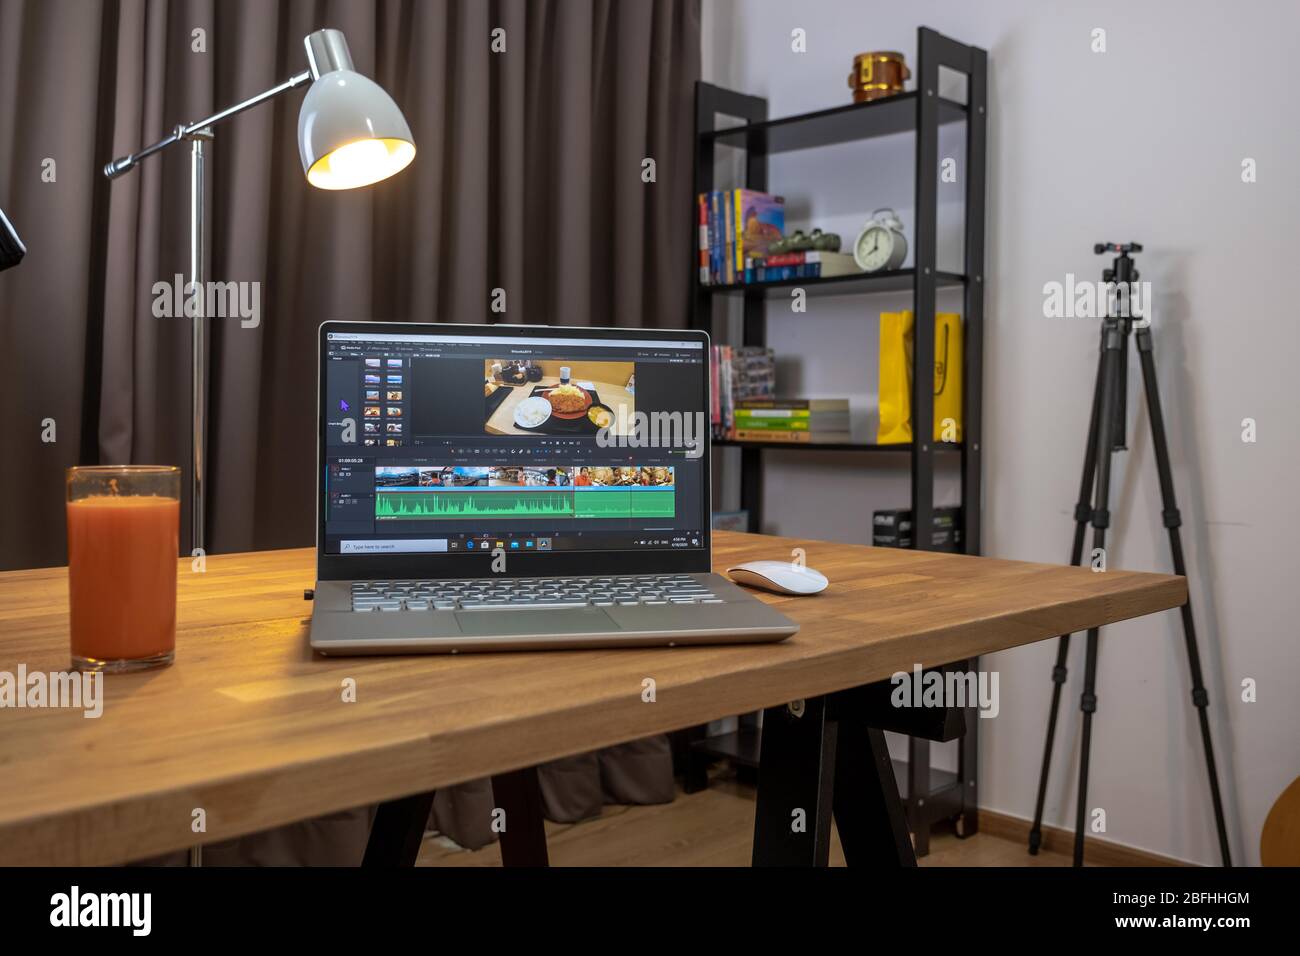 Working from home office by  a laptop and  creative software on the table.Remote working  by freelance anywhere has the internet and computer. Stock Photo